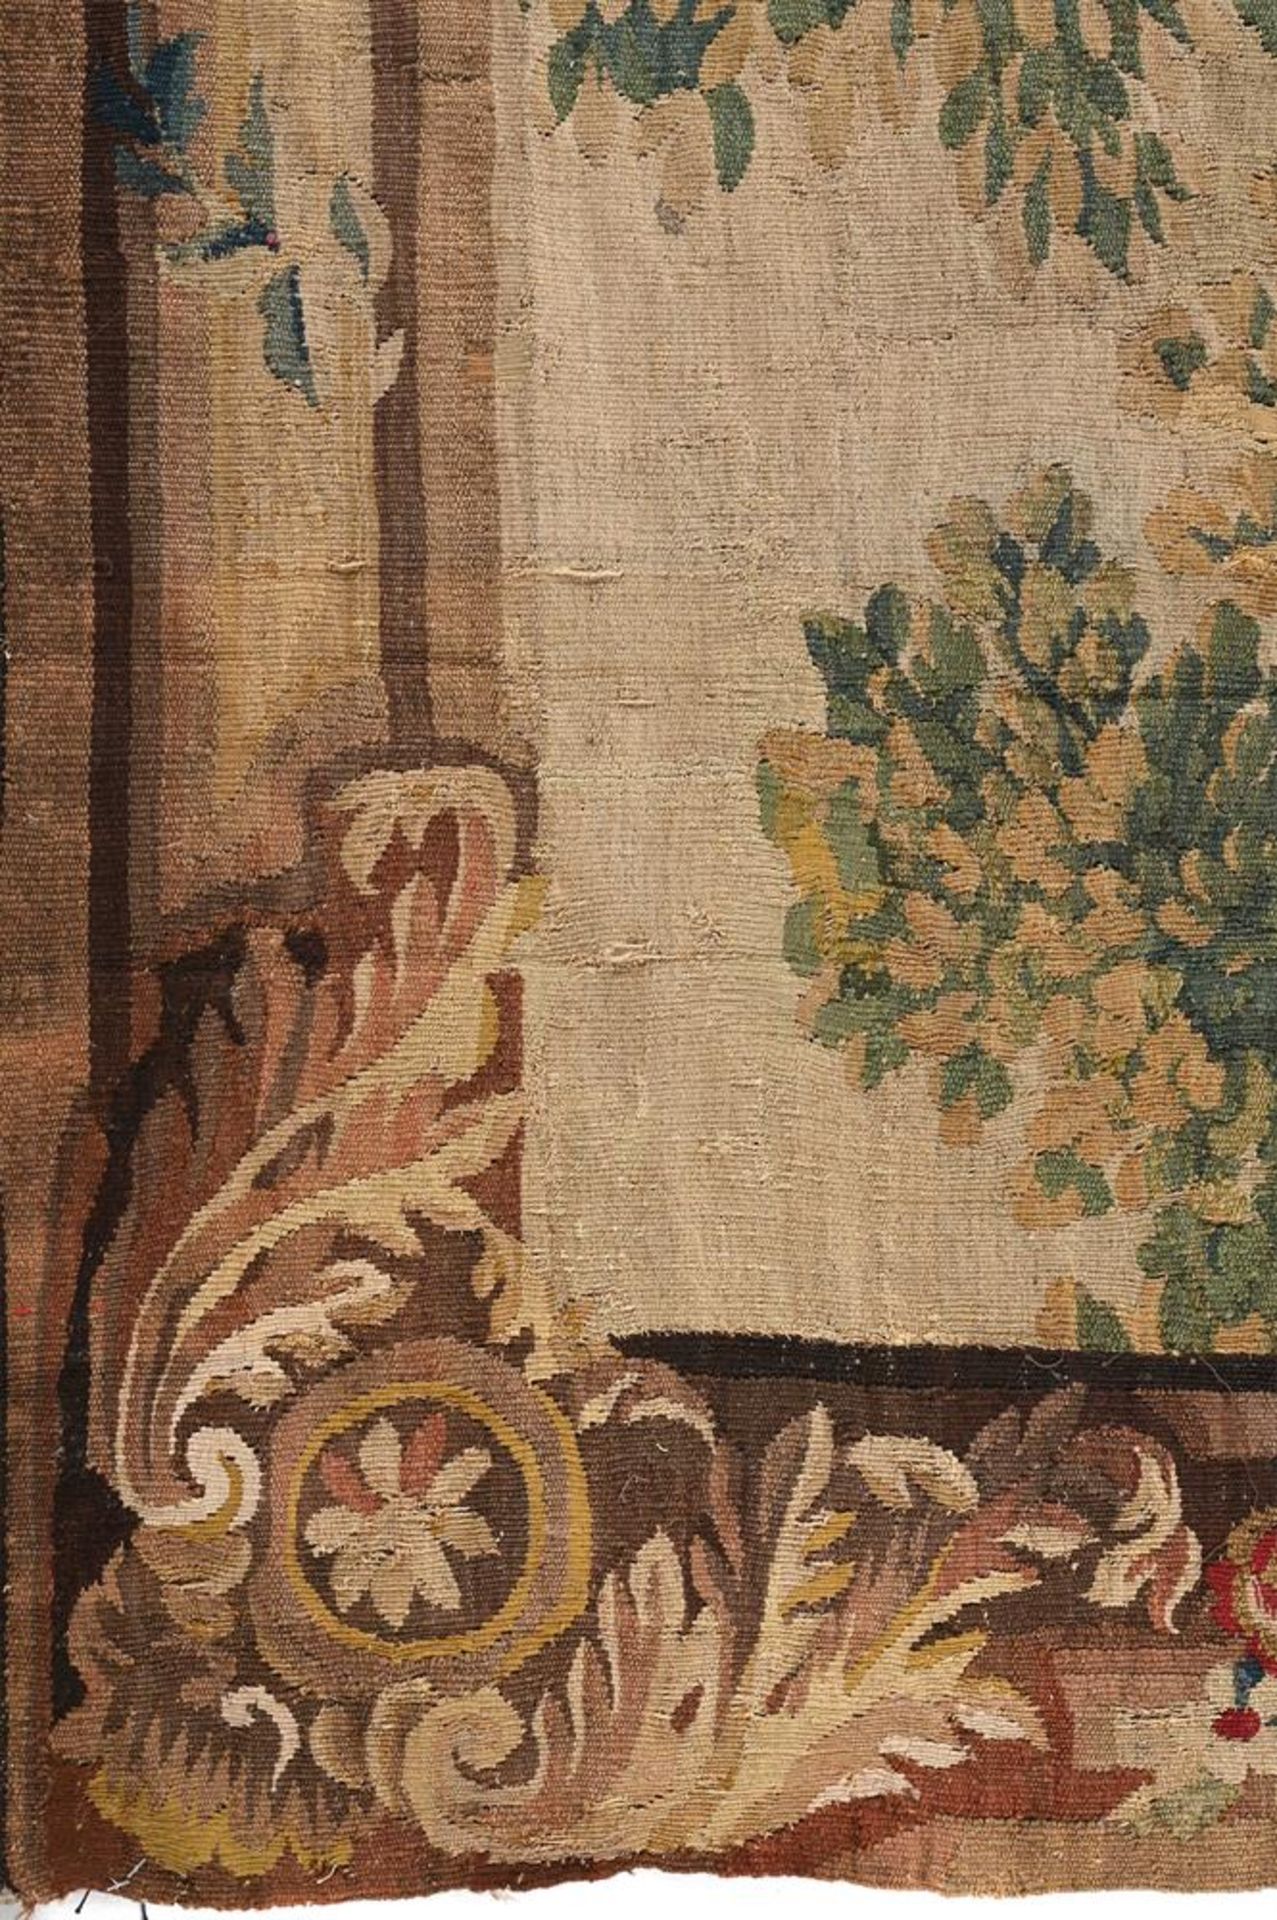 A LOUIS XV AUBUSSON PASTORAL TAPESTRY, THIRD QUARTER 18TH CENTURY - Image 3 of 3